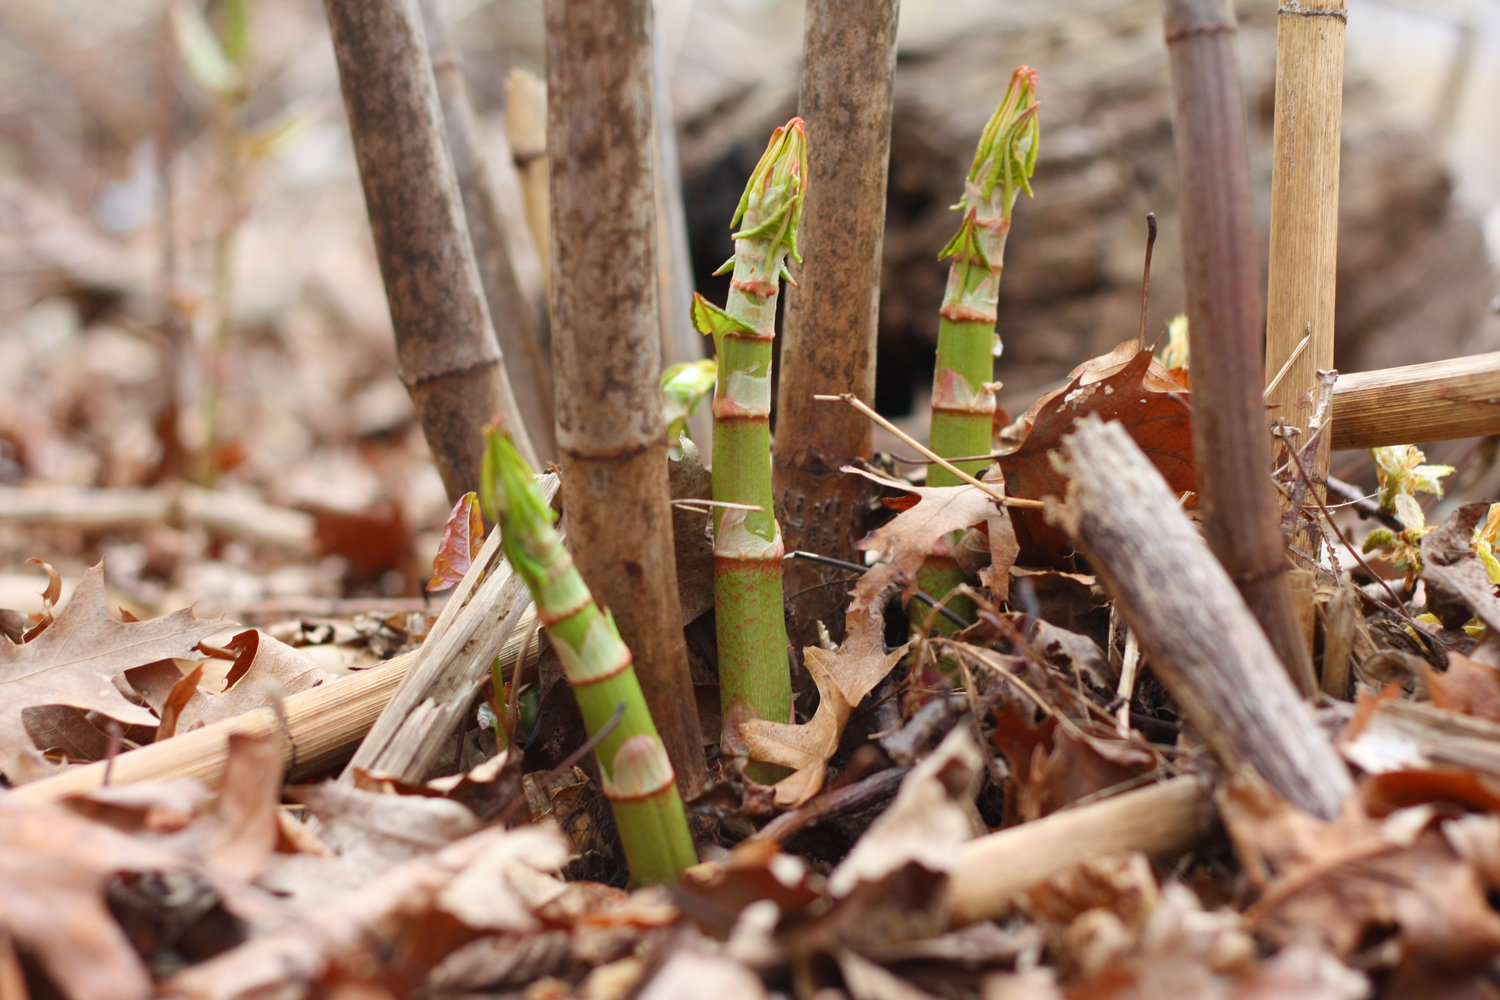 Japanese Knotweed dies back each fall and sends up new shoots in the springtime. The shoots are tasty and cutting them continually is one way to weaken the rhizomes under the surface.